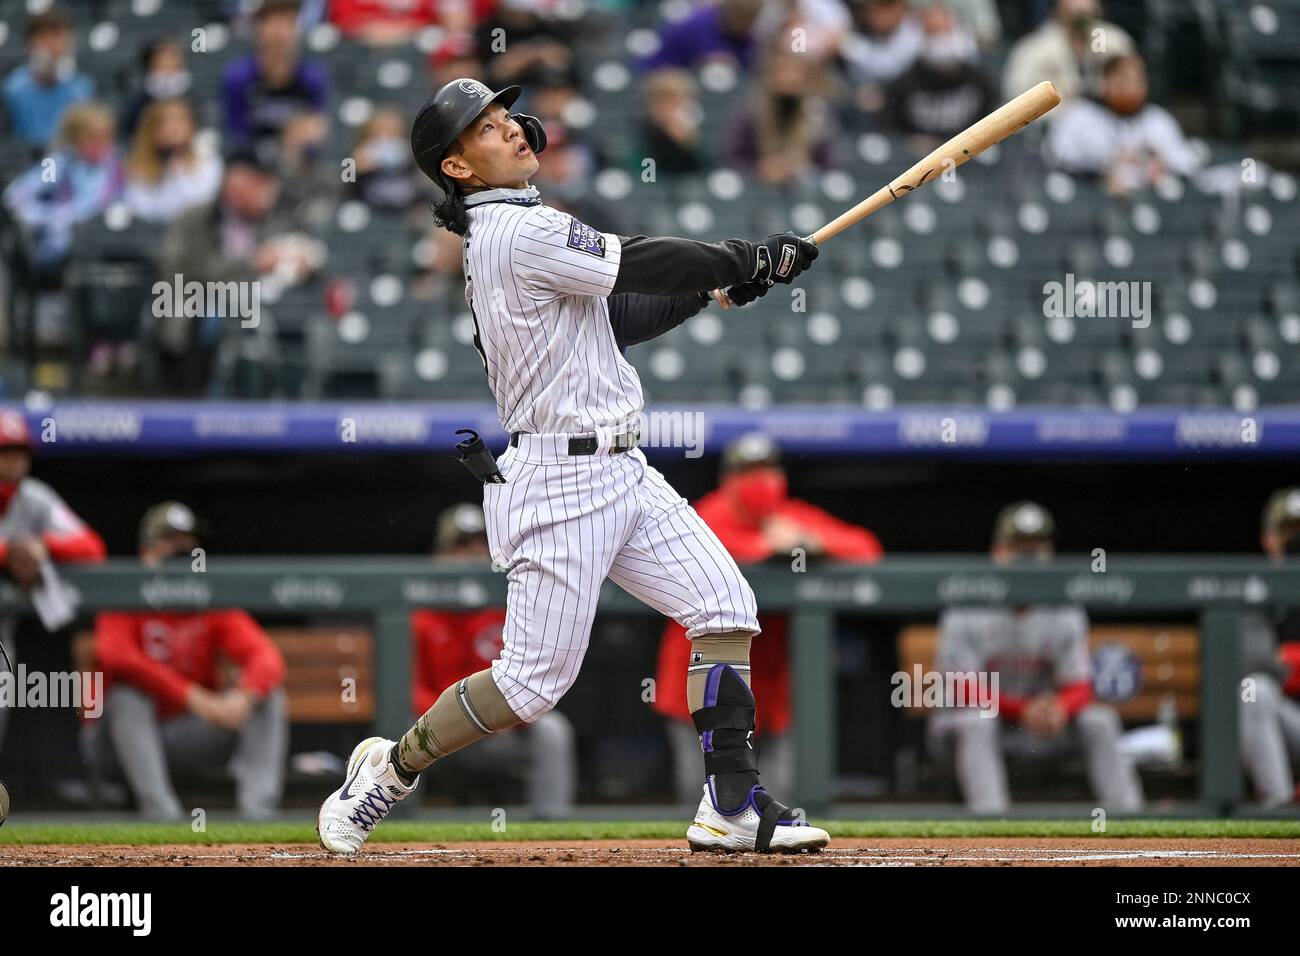 DENVER, CO - May 15: Colorado Rockies first baseman Connor Joe (9) puts a  ball in play and advances the baserunner during a game between the Colorado  Rockies and the Cincinnati Reds